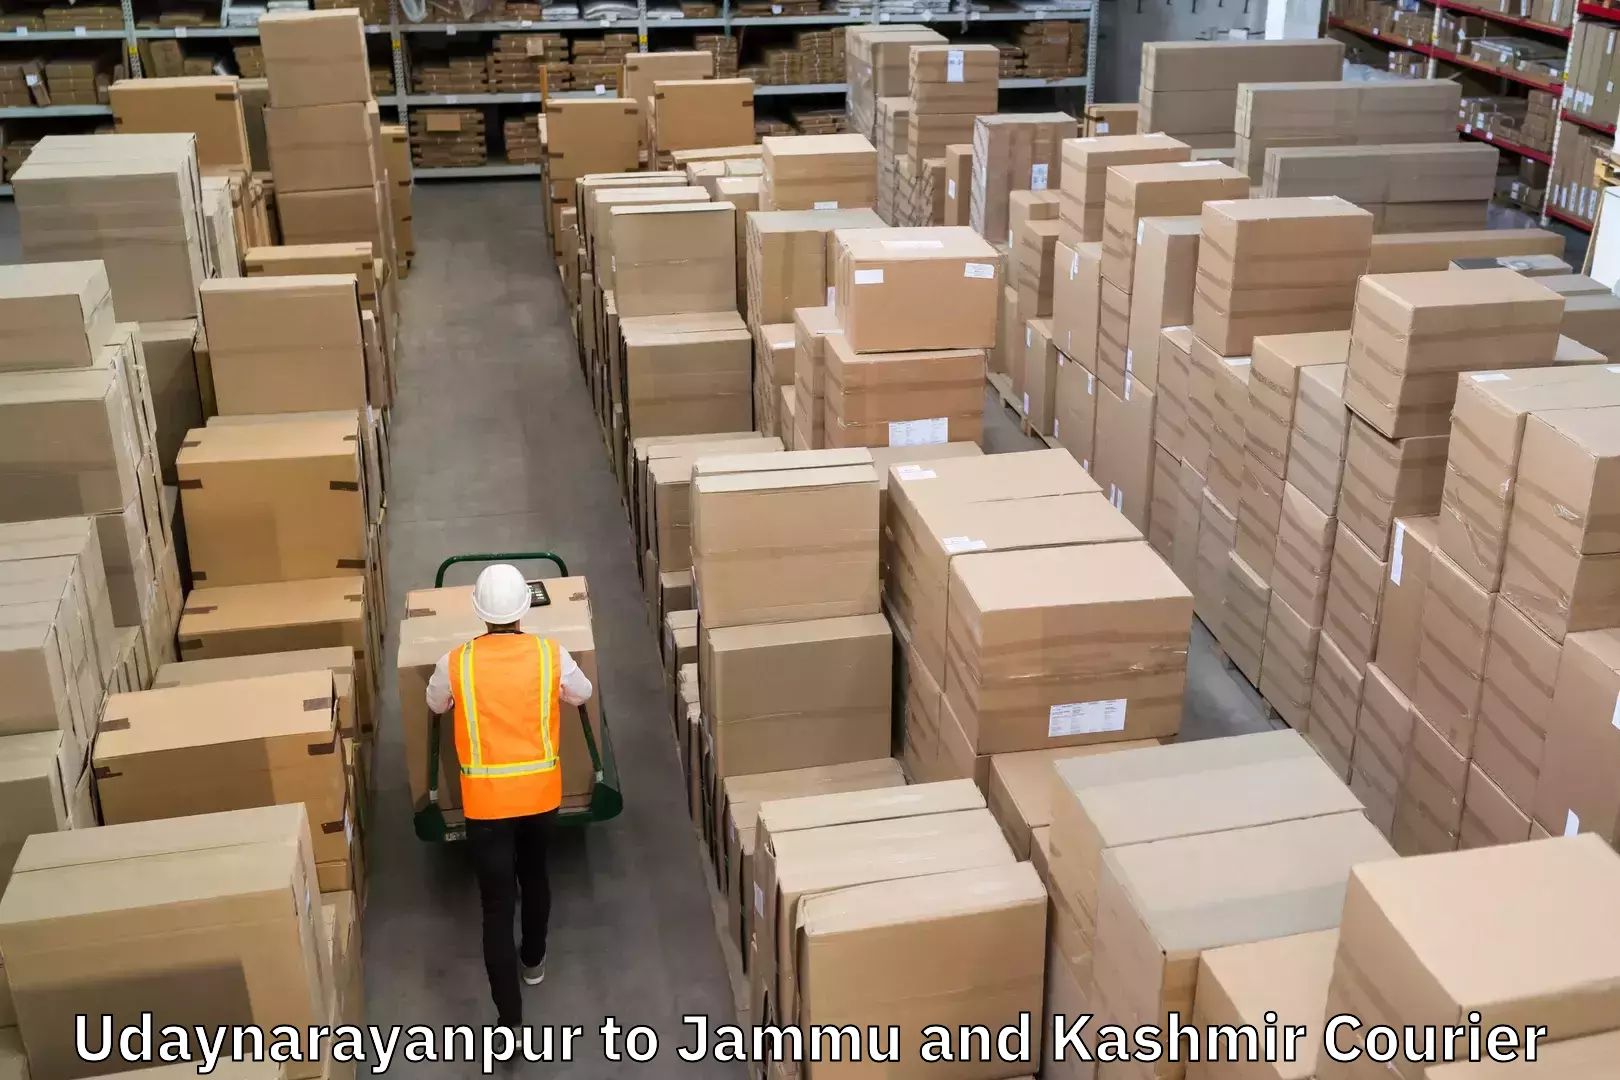 Round-the-clock parcel delivery Udaynarayanpur to Jammu and Kashmir